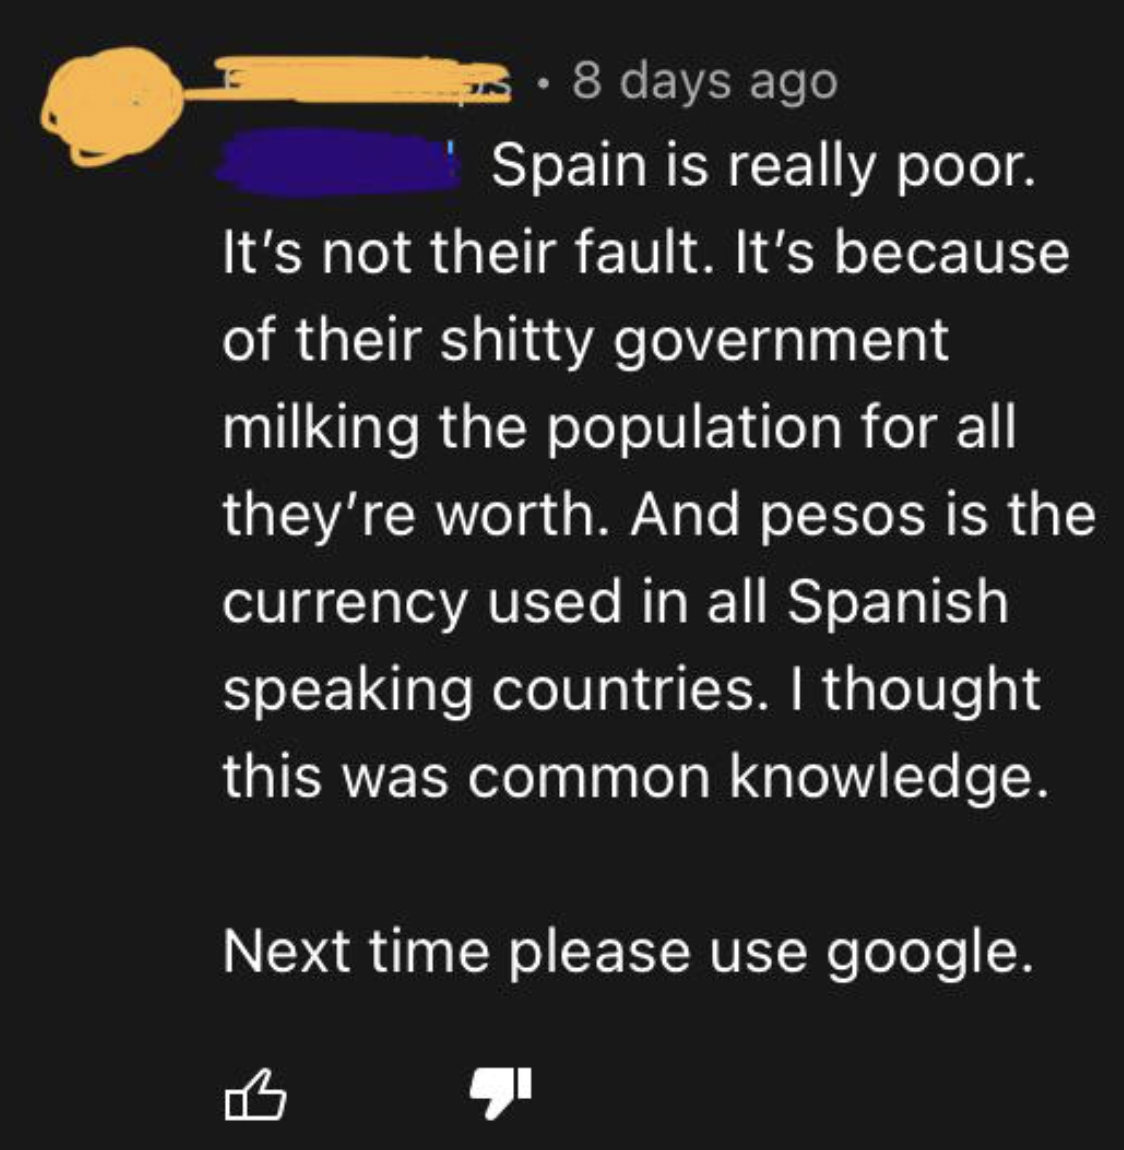 Confidently incorrect - atmosphere - 8 days ago Spain is really poor. It's not their fault. It's because of their shitty government milking the population for all they're worth. And pesos is the currency used in all Spanish speaking countries. I thought t